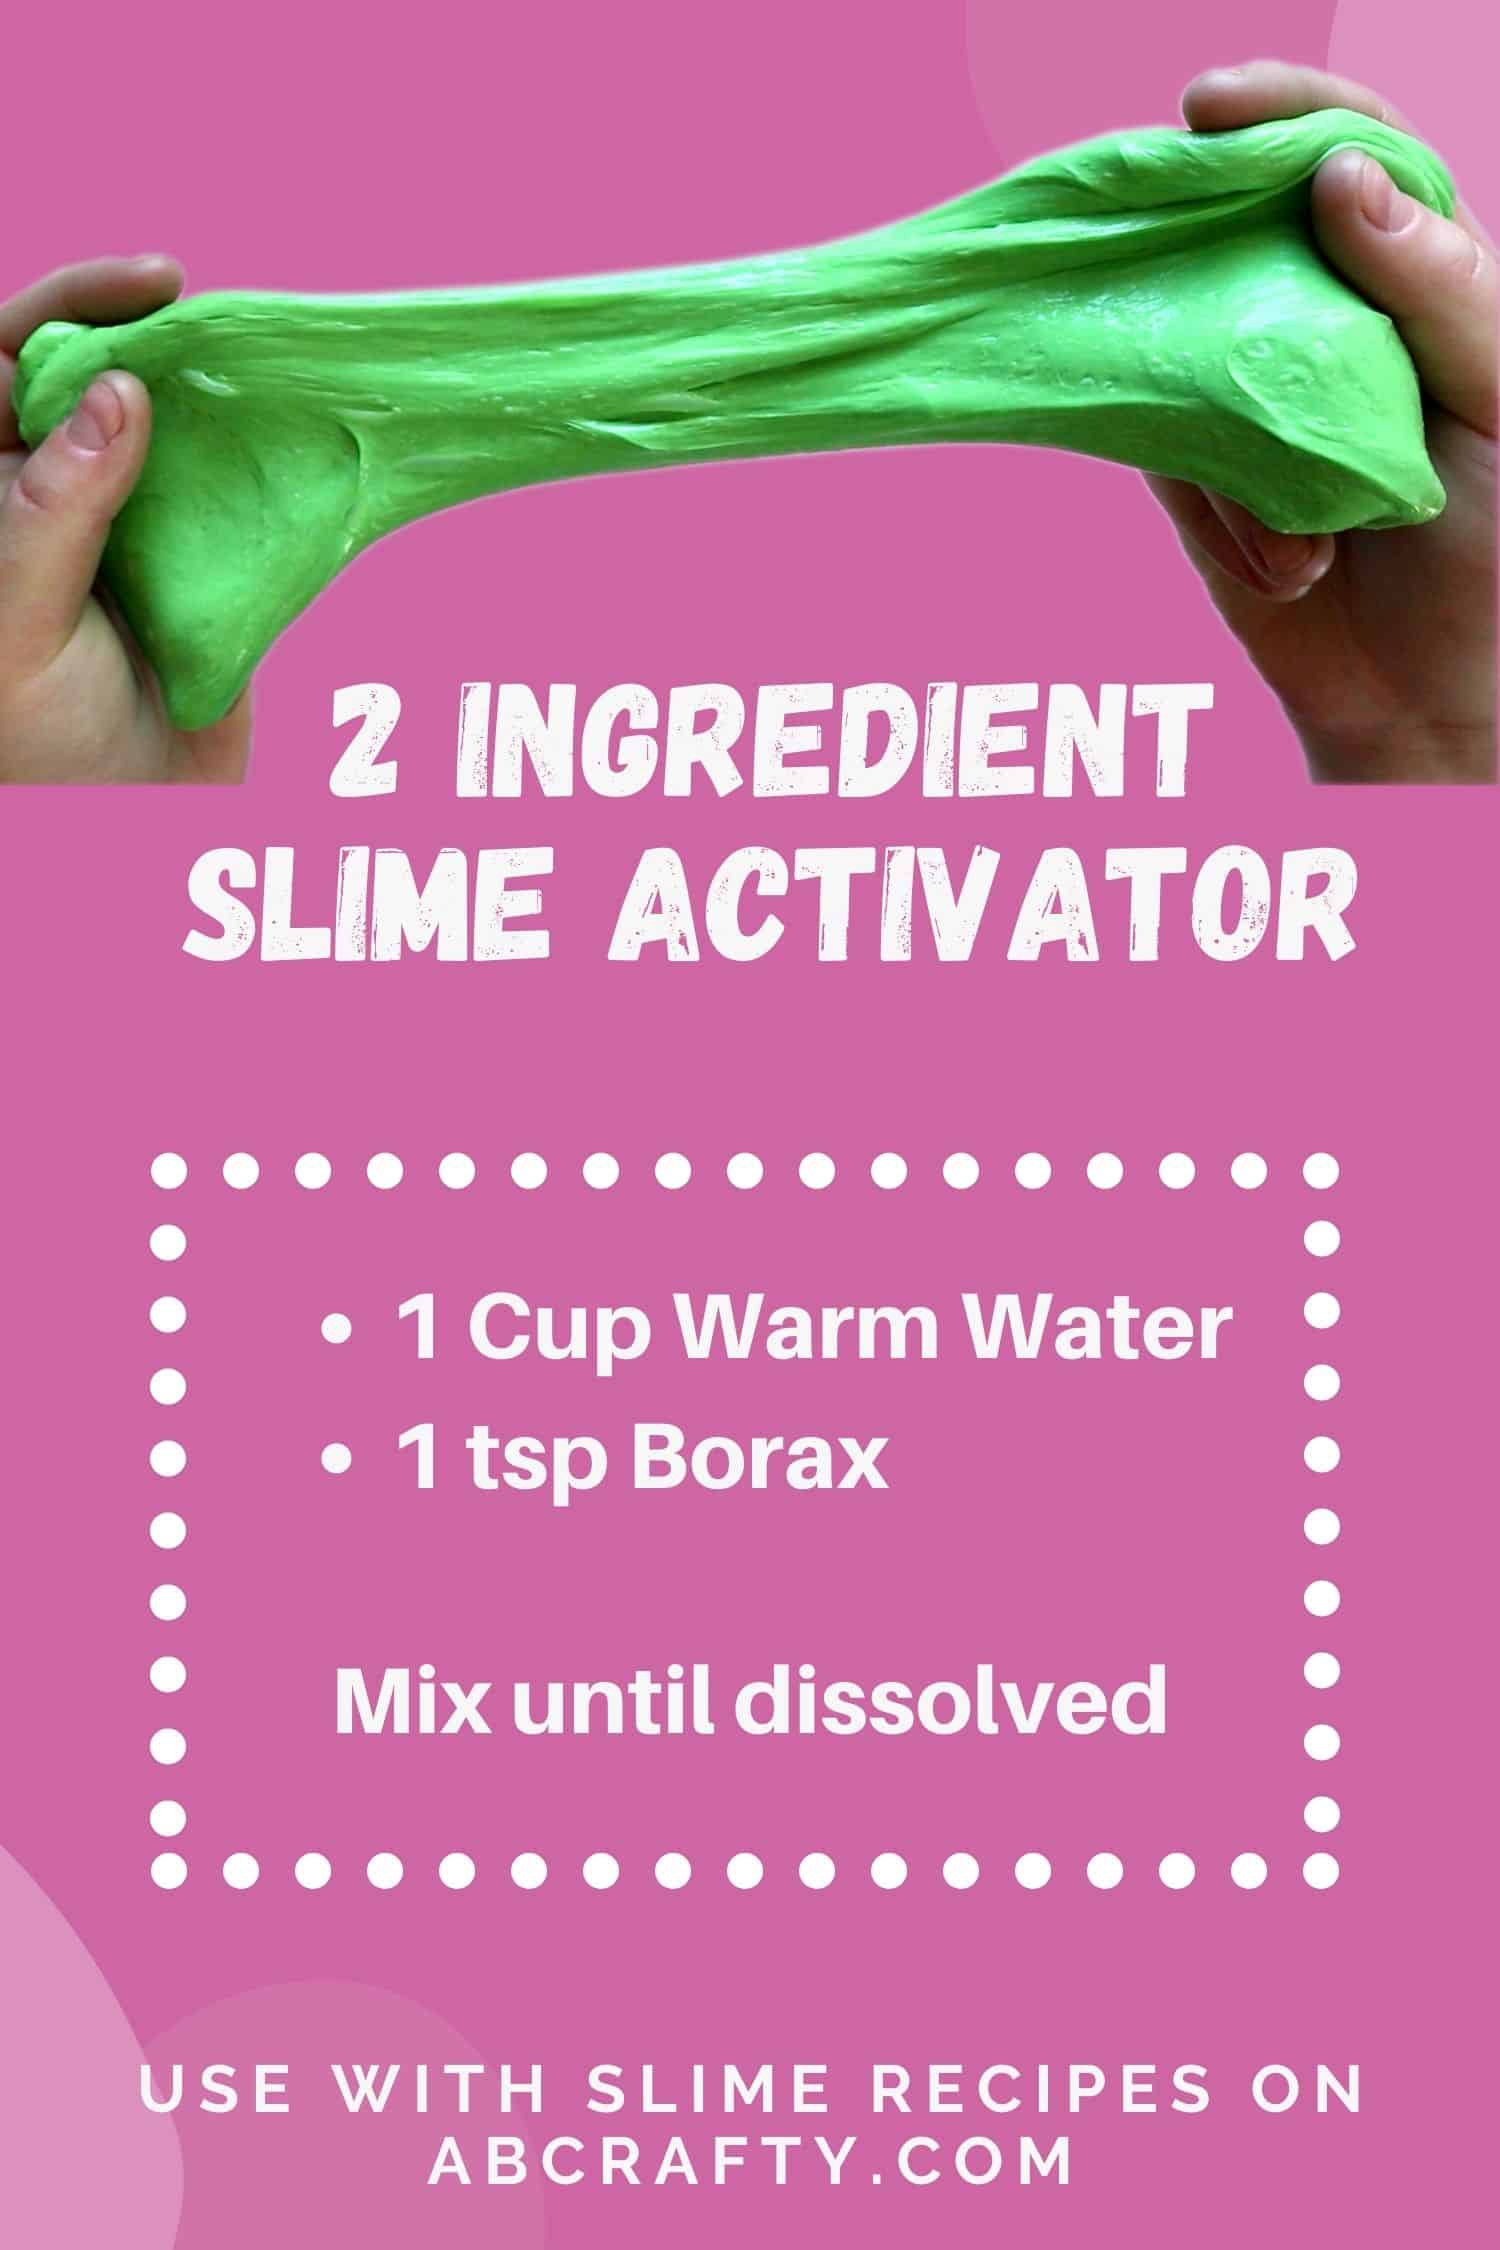 Slime Making 101: How to Make Slime the Easy Way